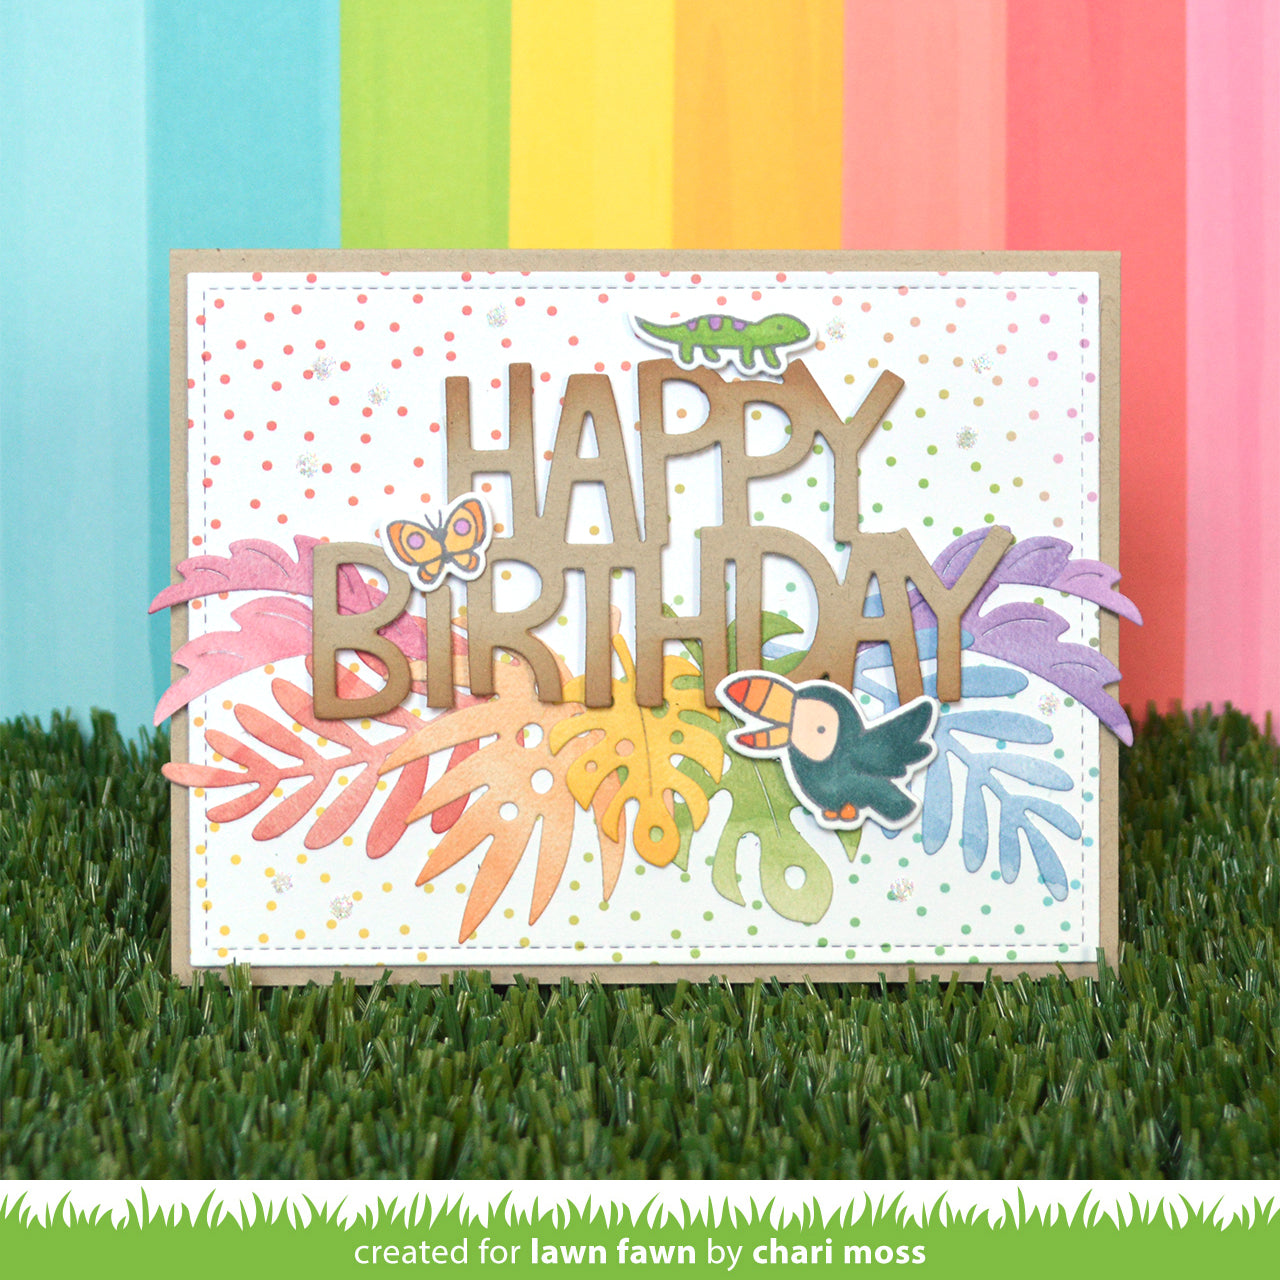 watercolor wishes rainbow collection pack